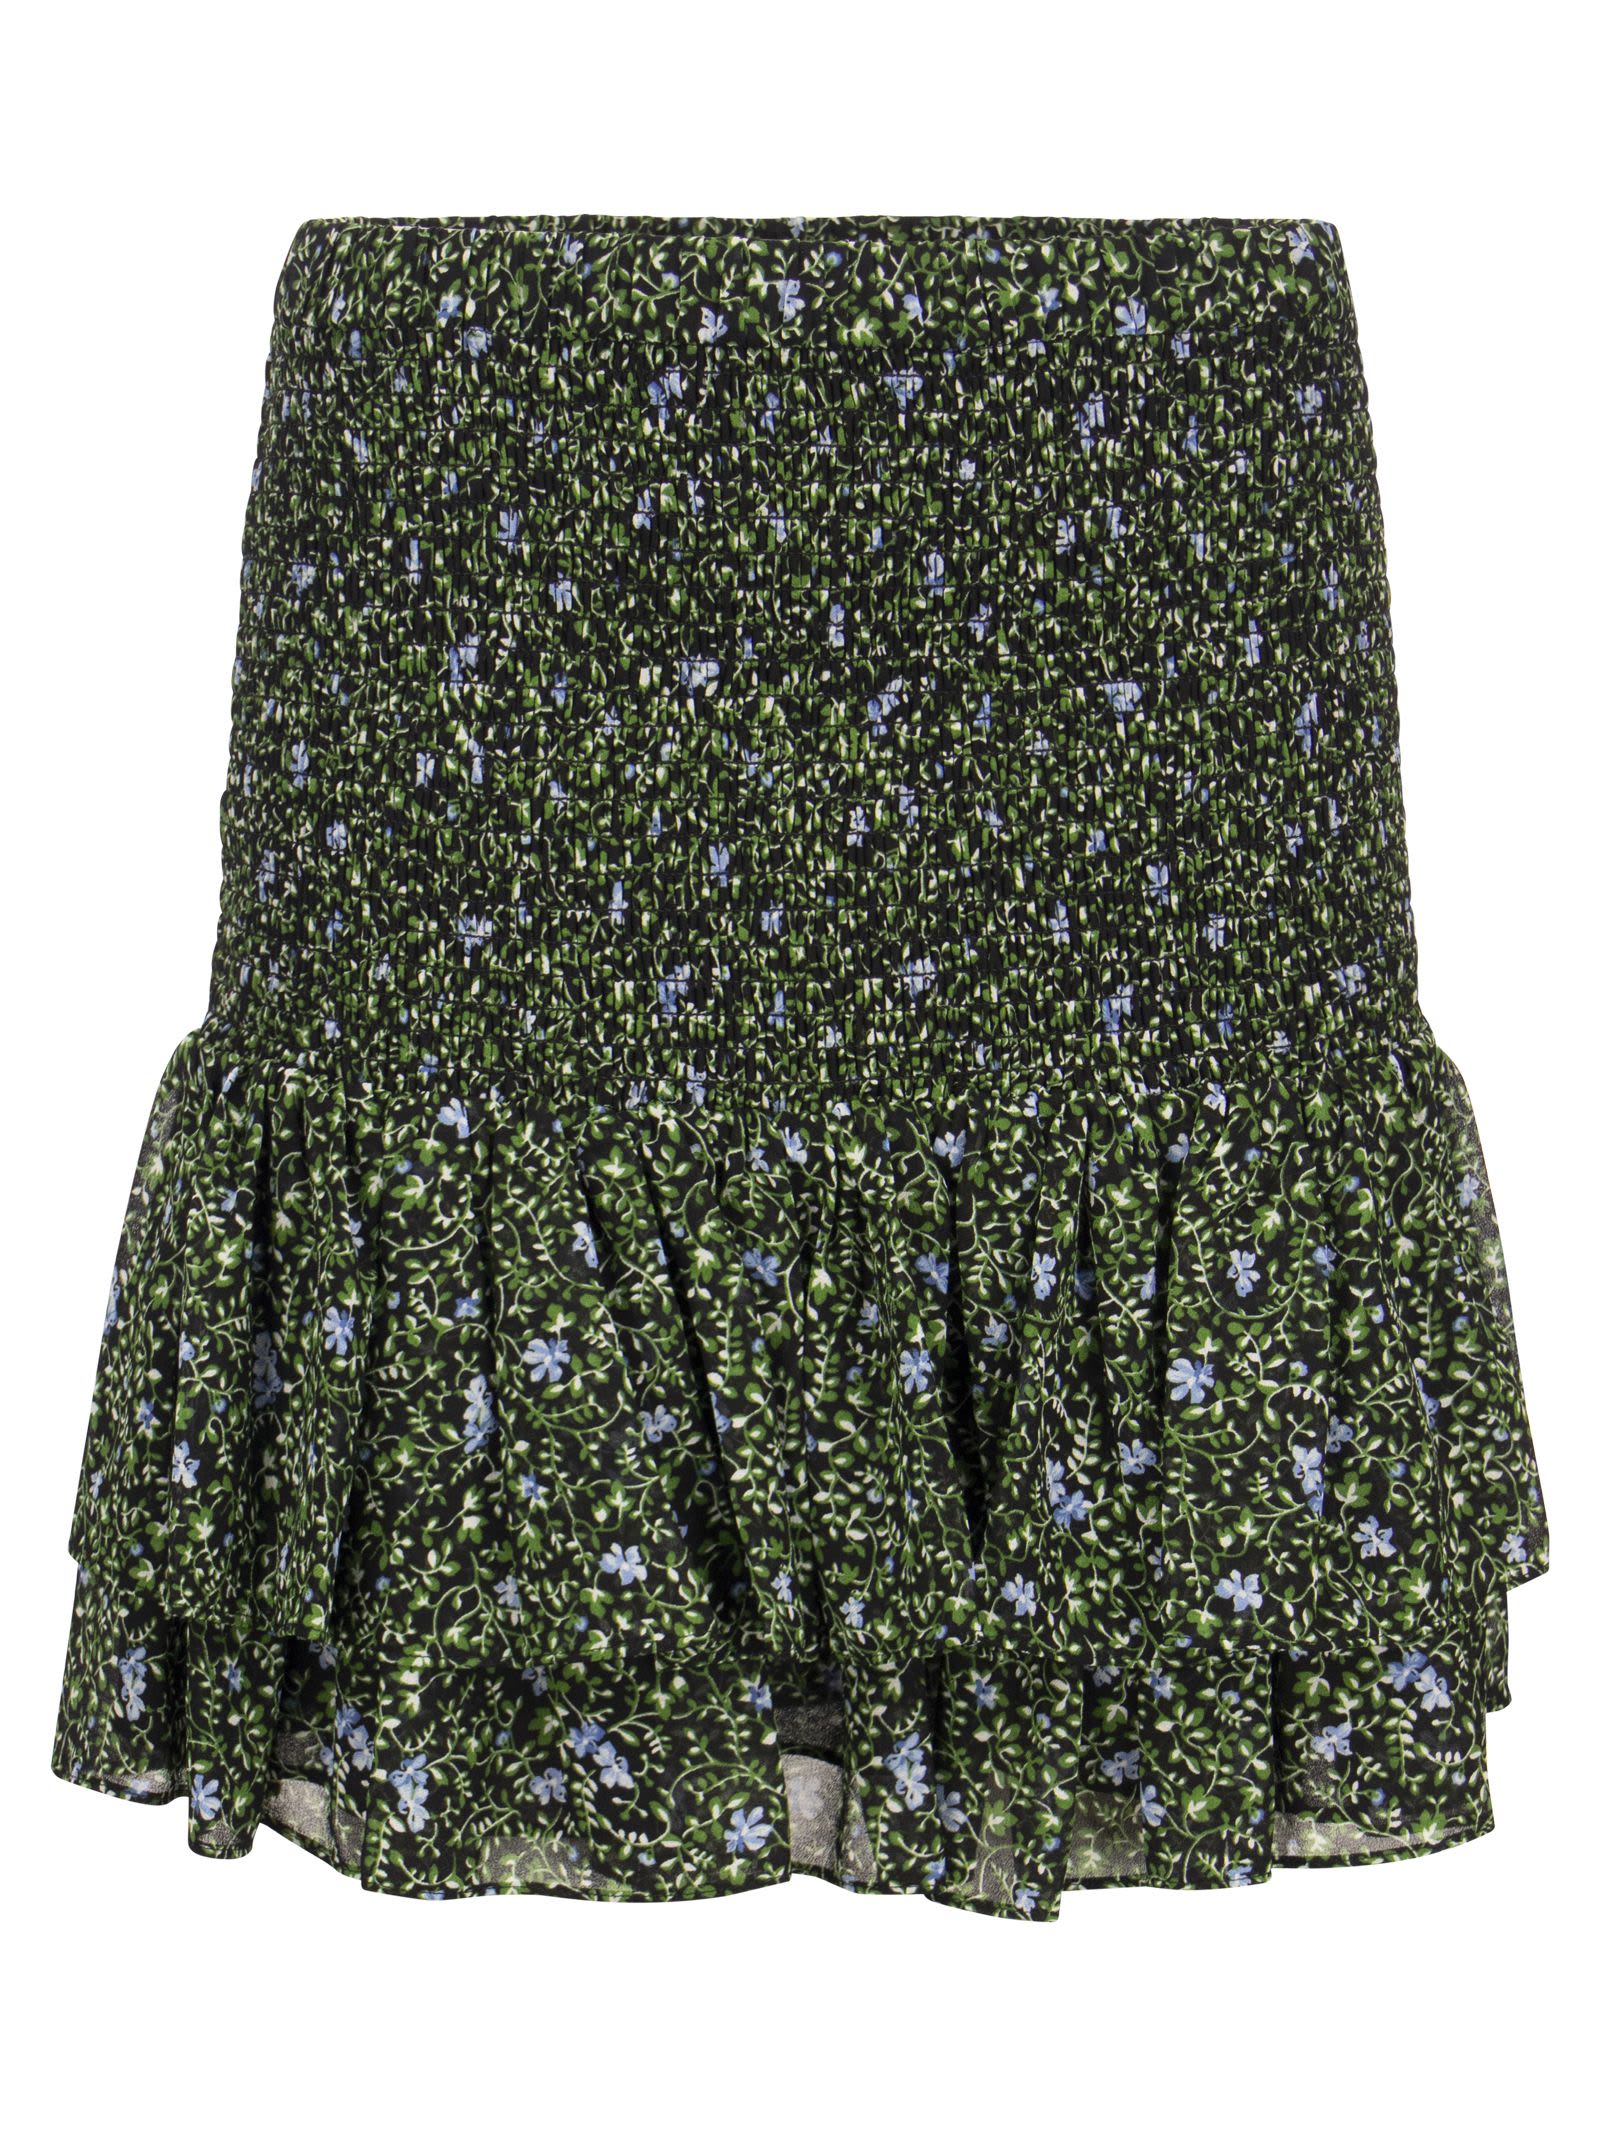 Michael Kors Georgette Miniskirt With Smock Stitch And Floral Print